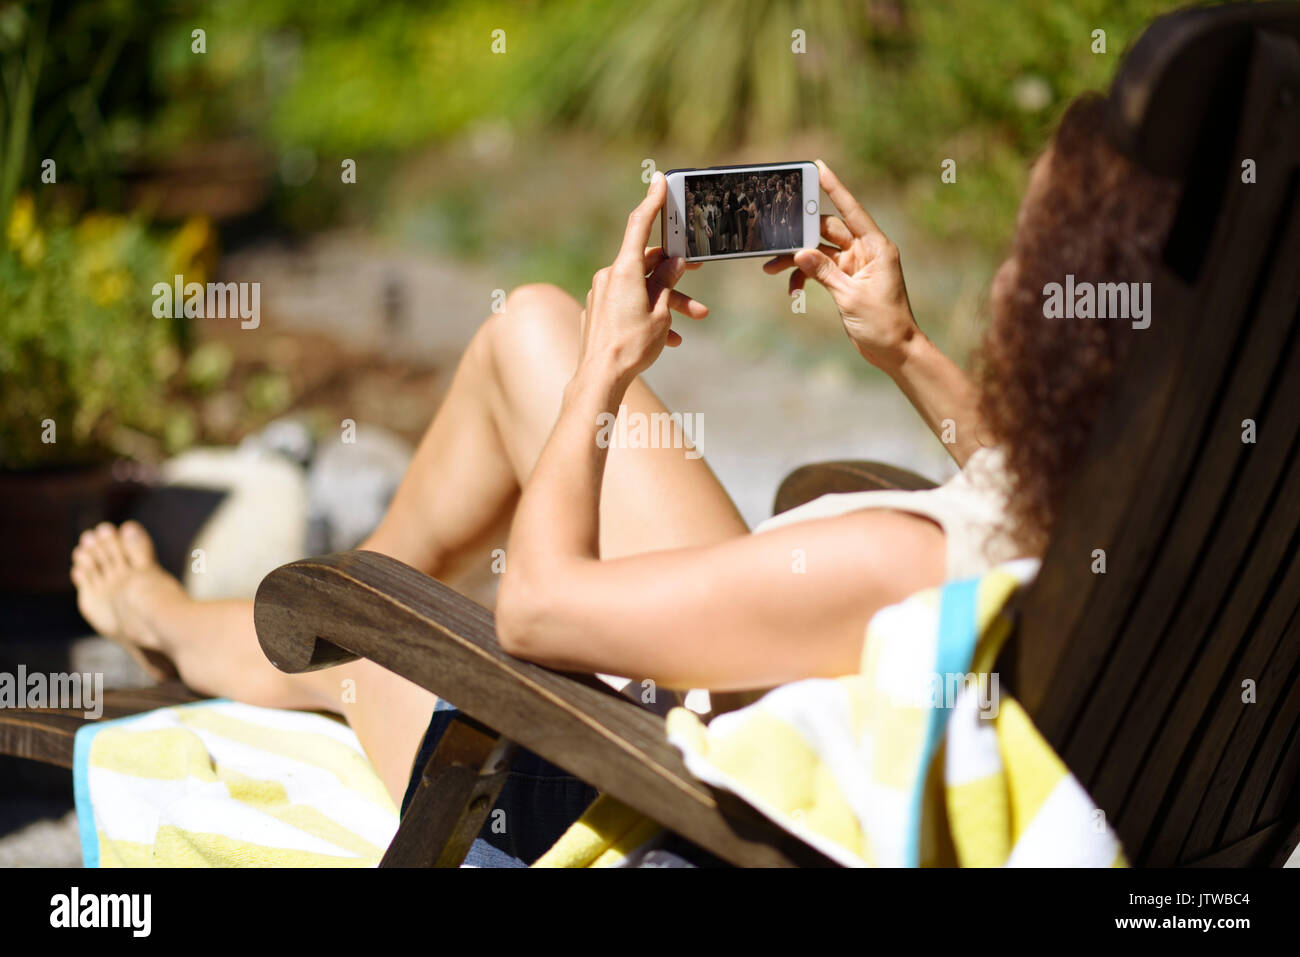 Young woman lying in a lounge chair in the sun, sunbathing with an iPhone in her hands, watching a movie on the phone screen Stock Photo